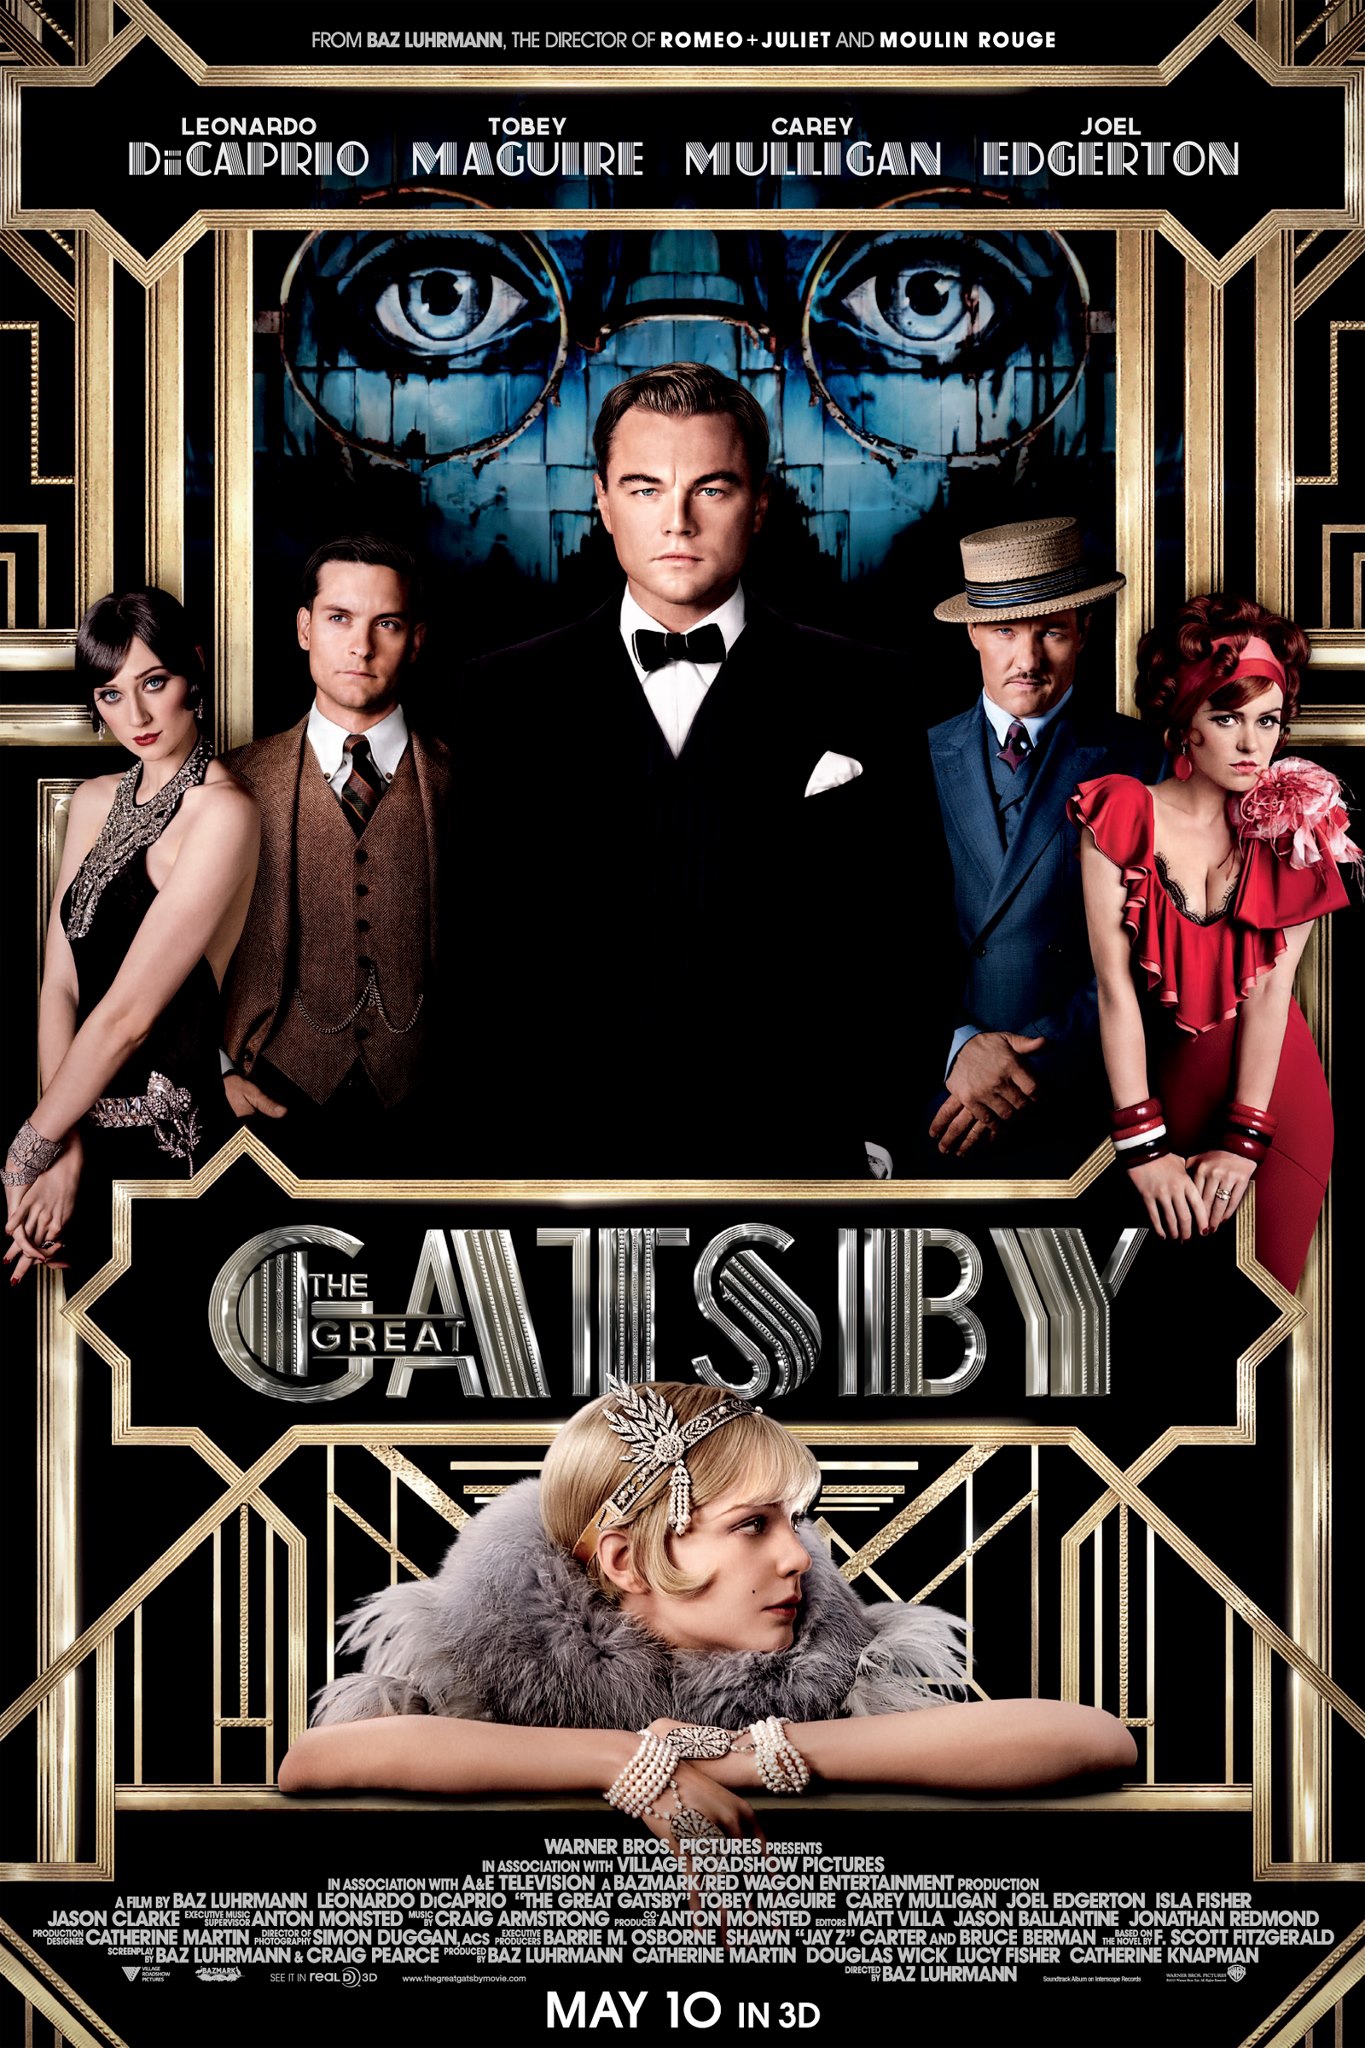 The Great Gatsby - Movie Poster #1 (Original)